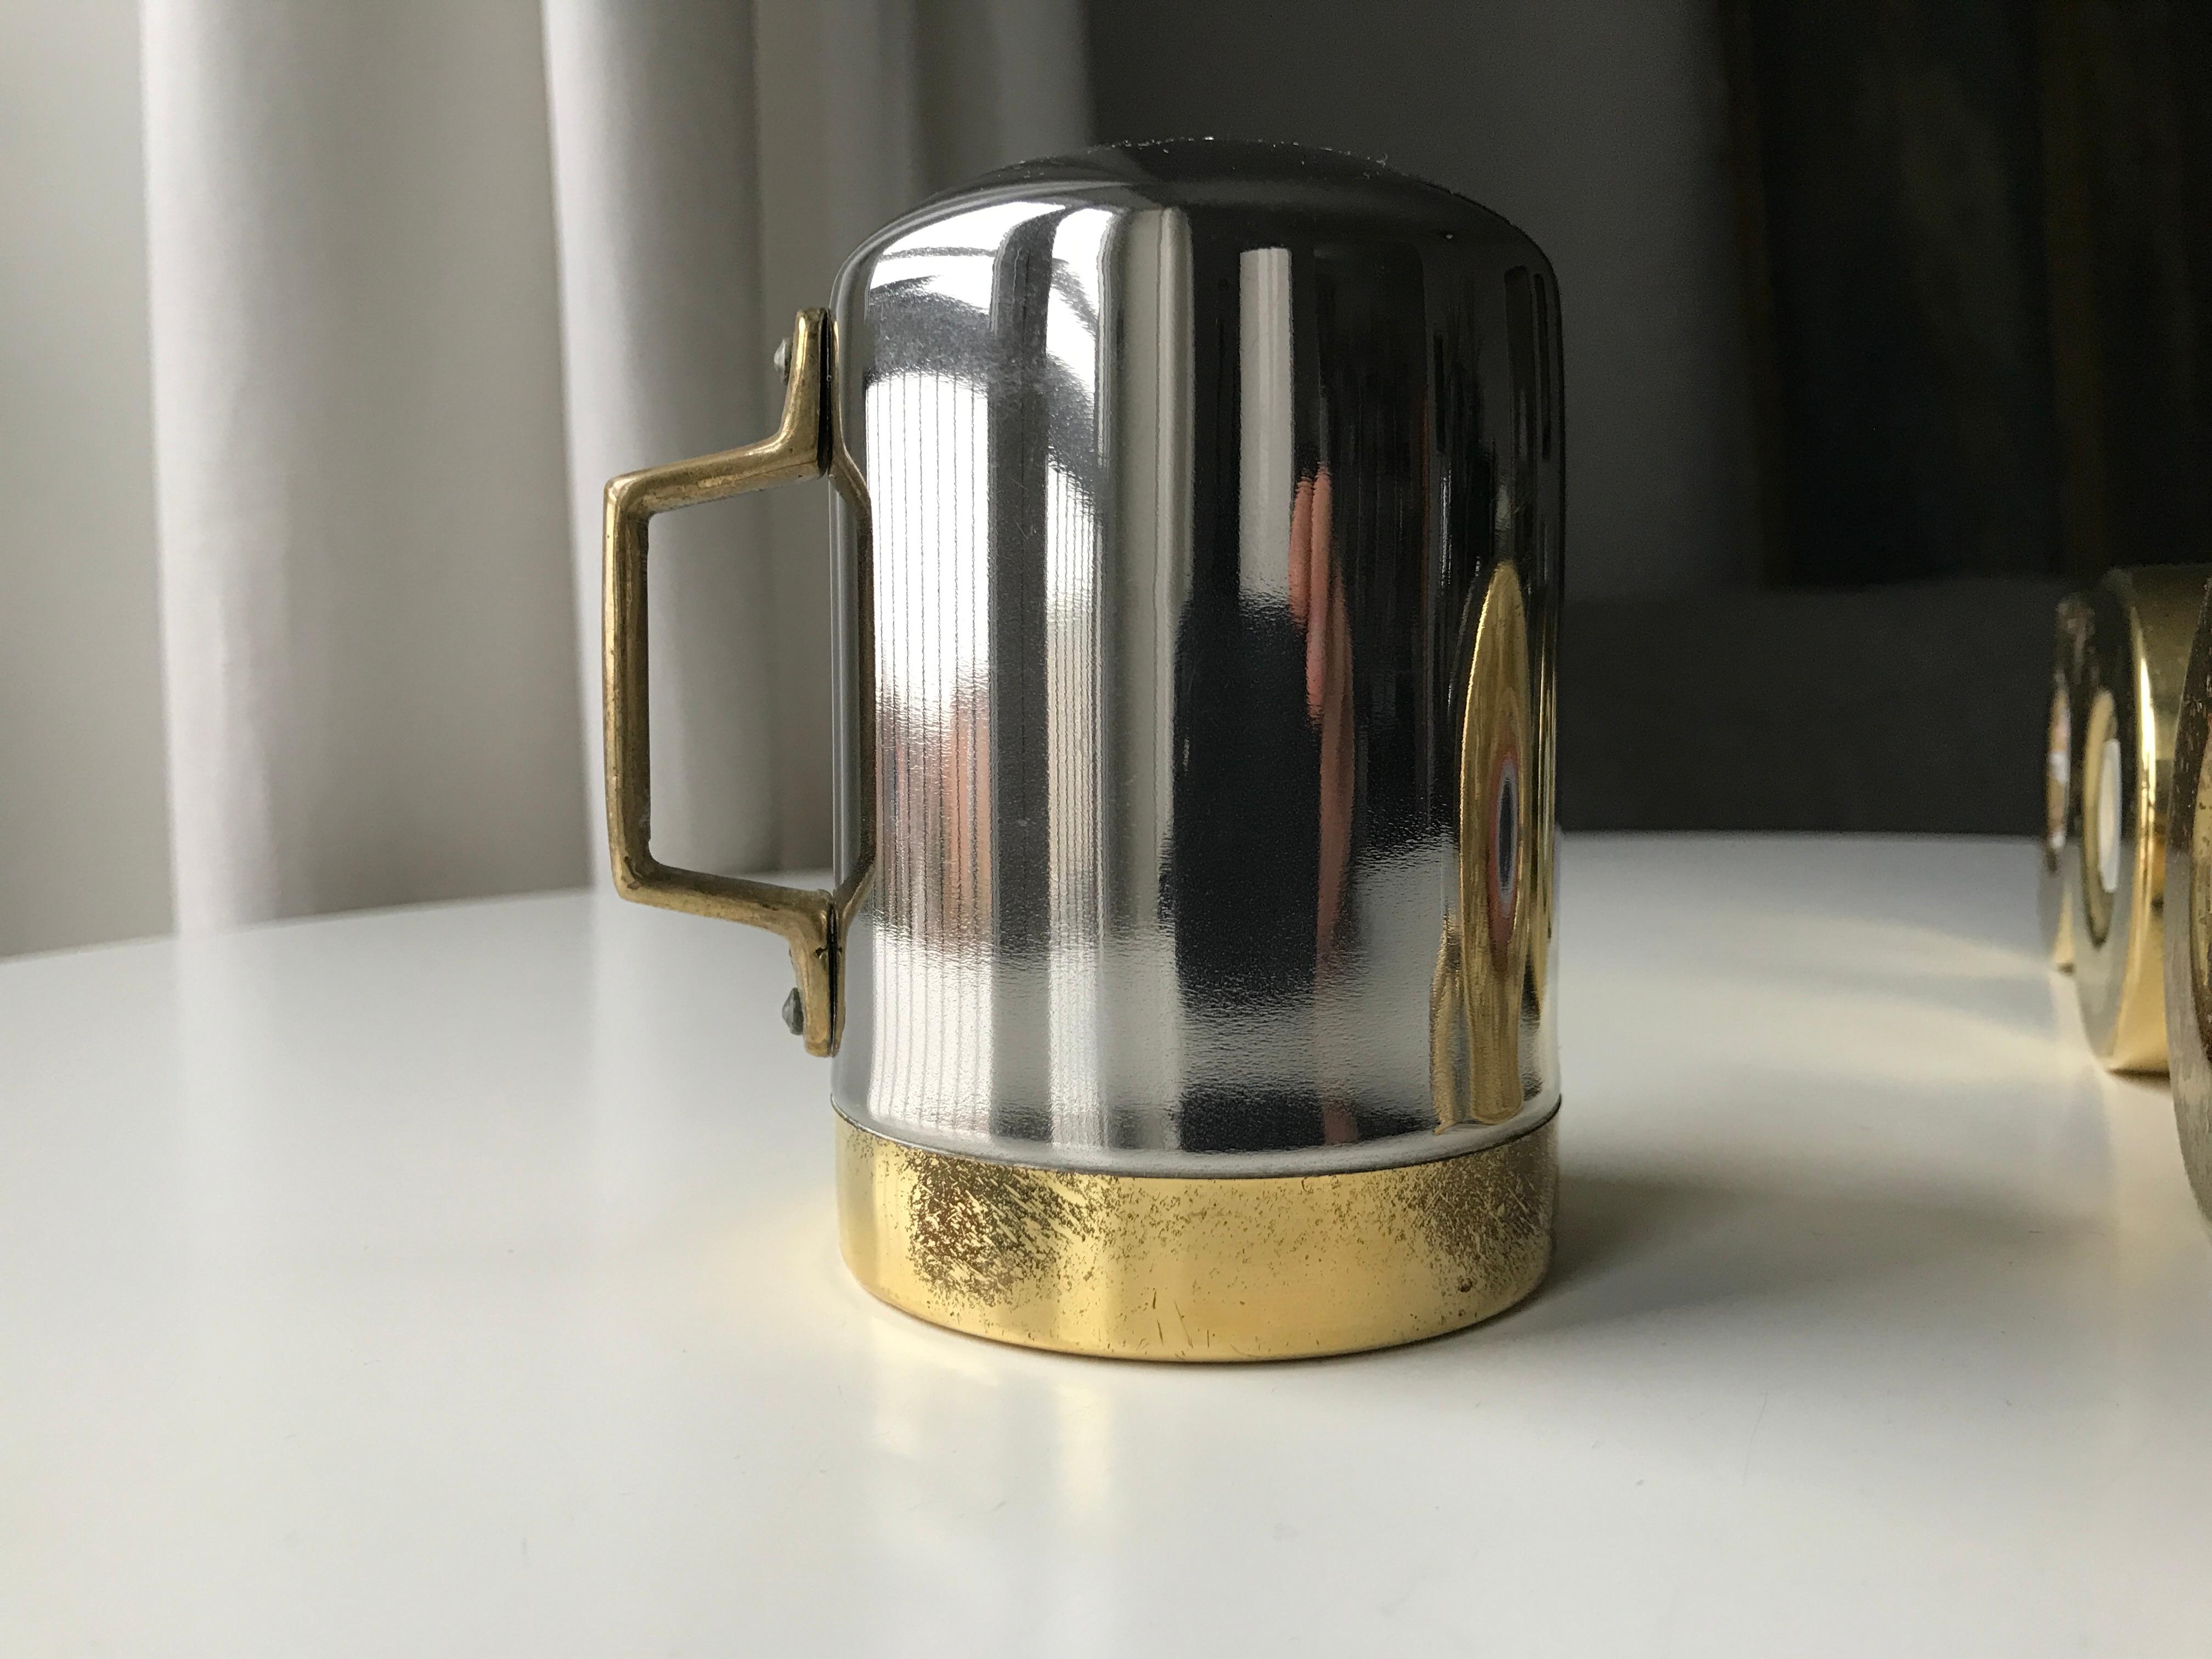 Salt and Pepper Space Age Vintage Diner Set, 1960s Chrome and Brass For Sale 6